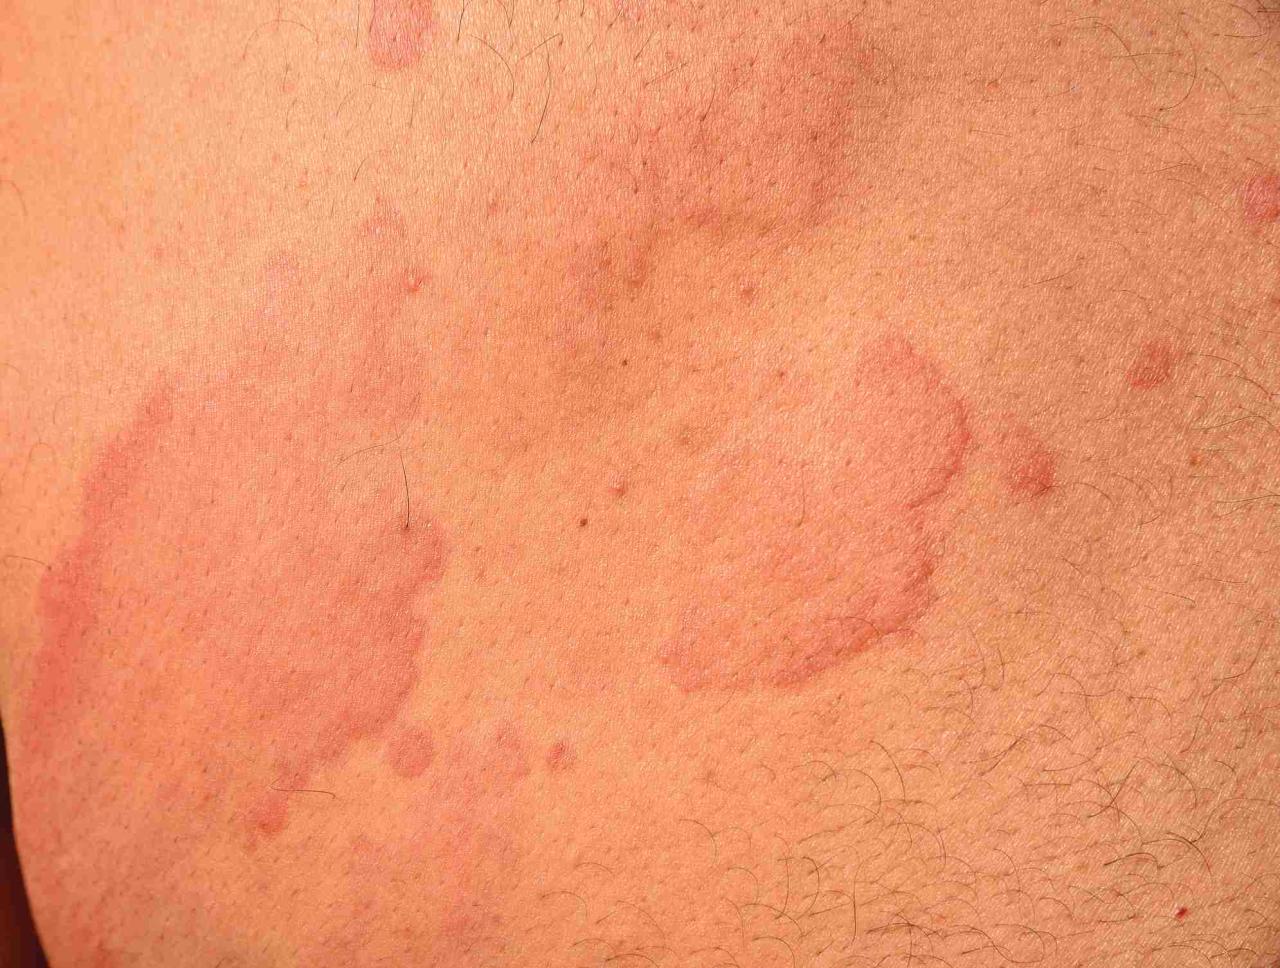 Hives indicate intolerance